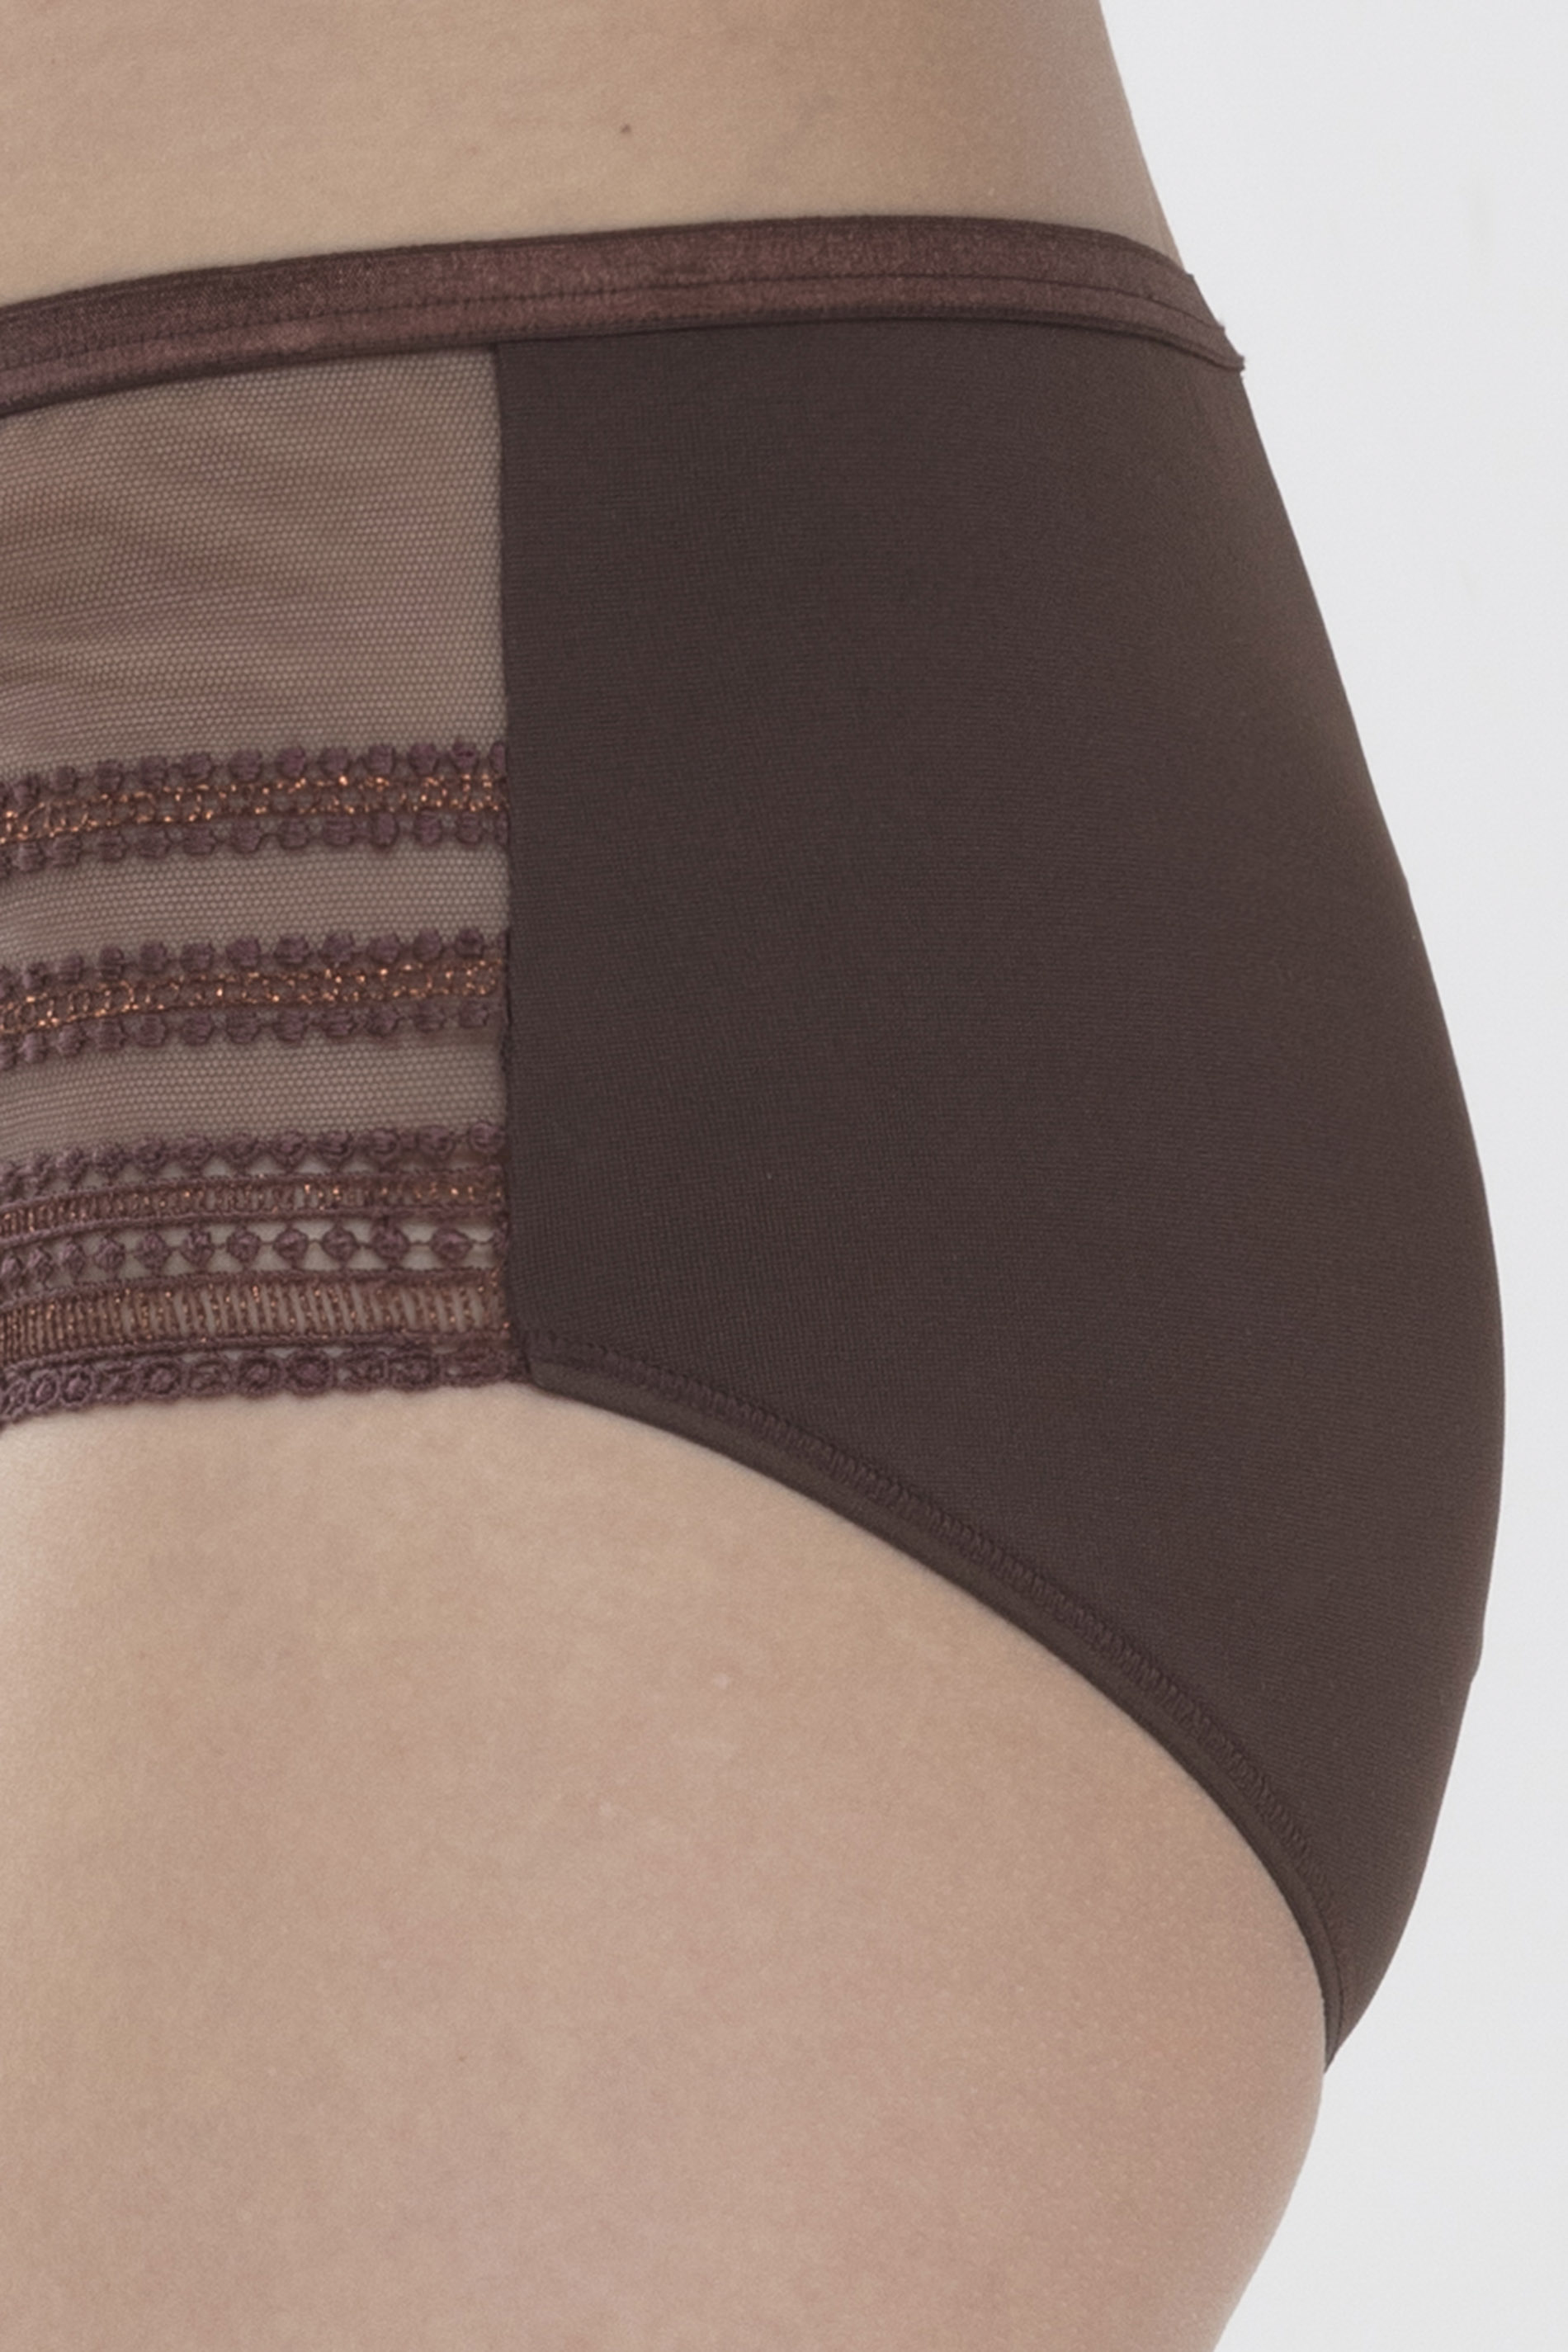 Panty Liquorice Brown Emotion Deluxe Detailansicht 02 | mey®